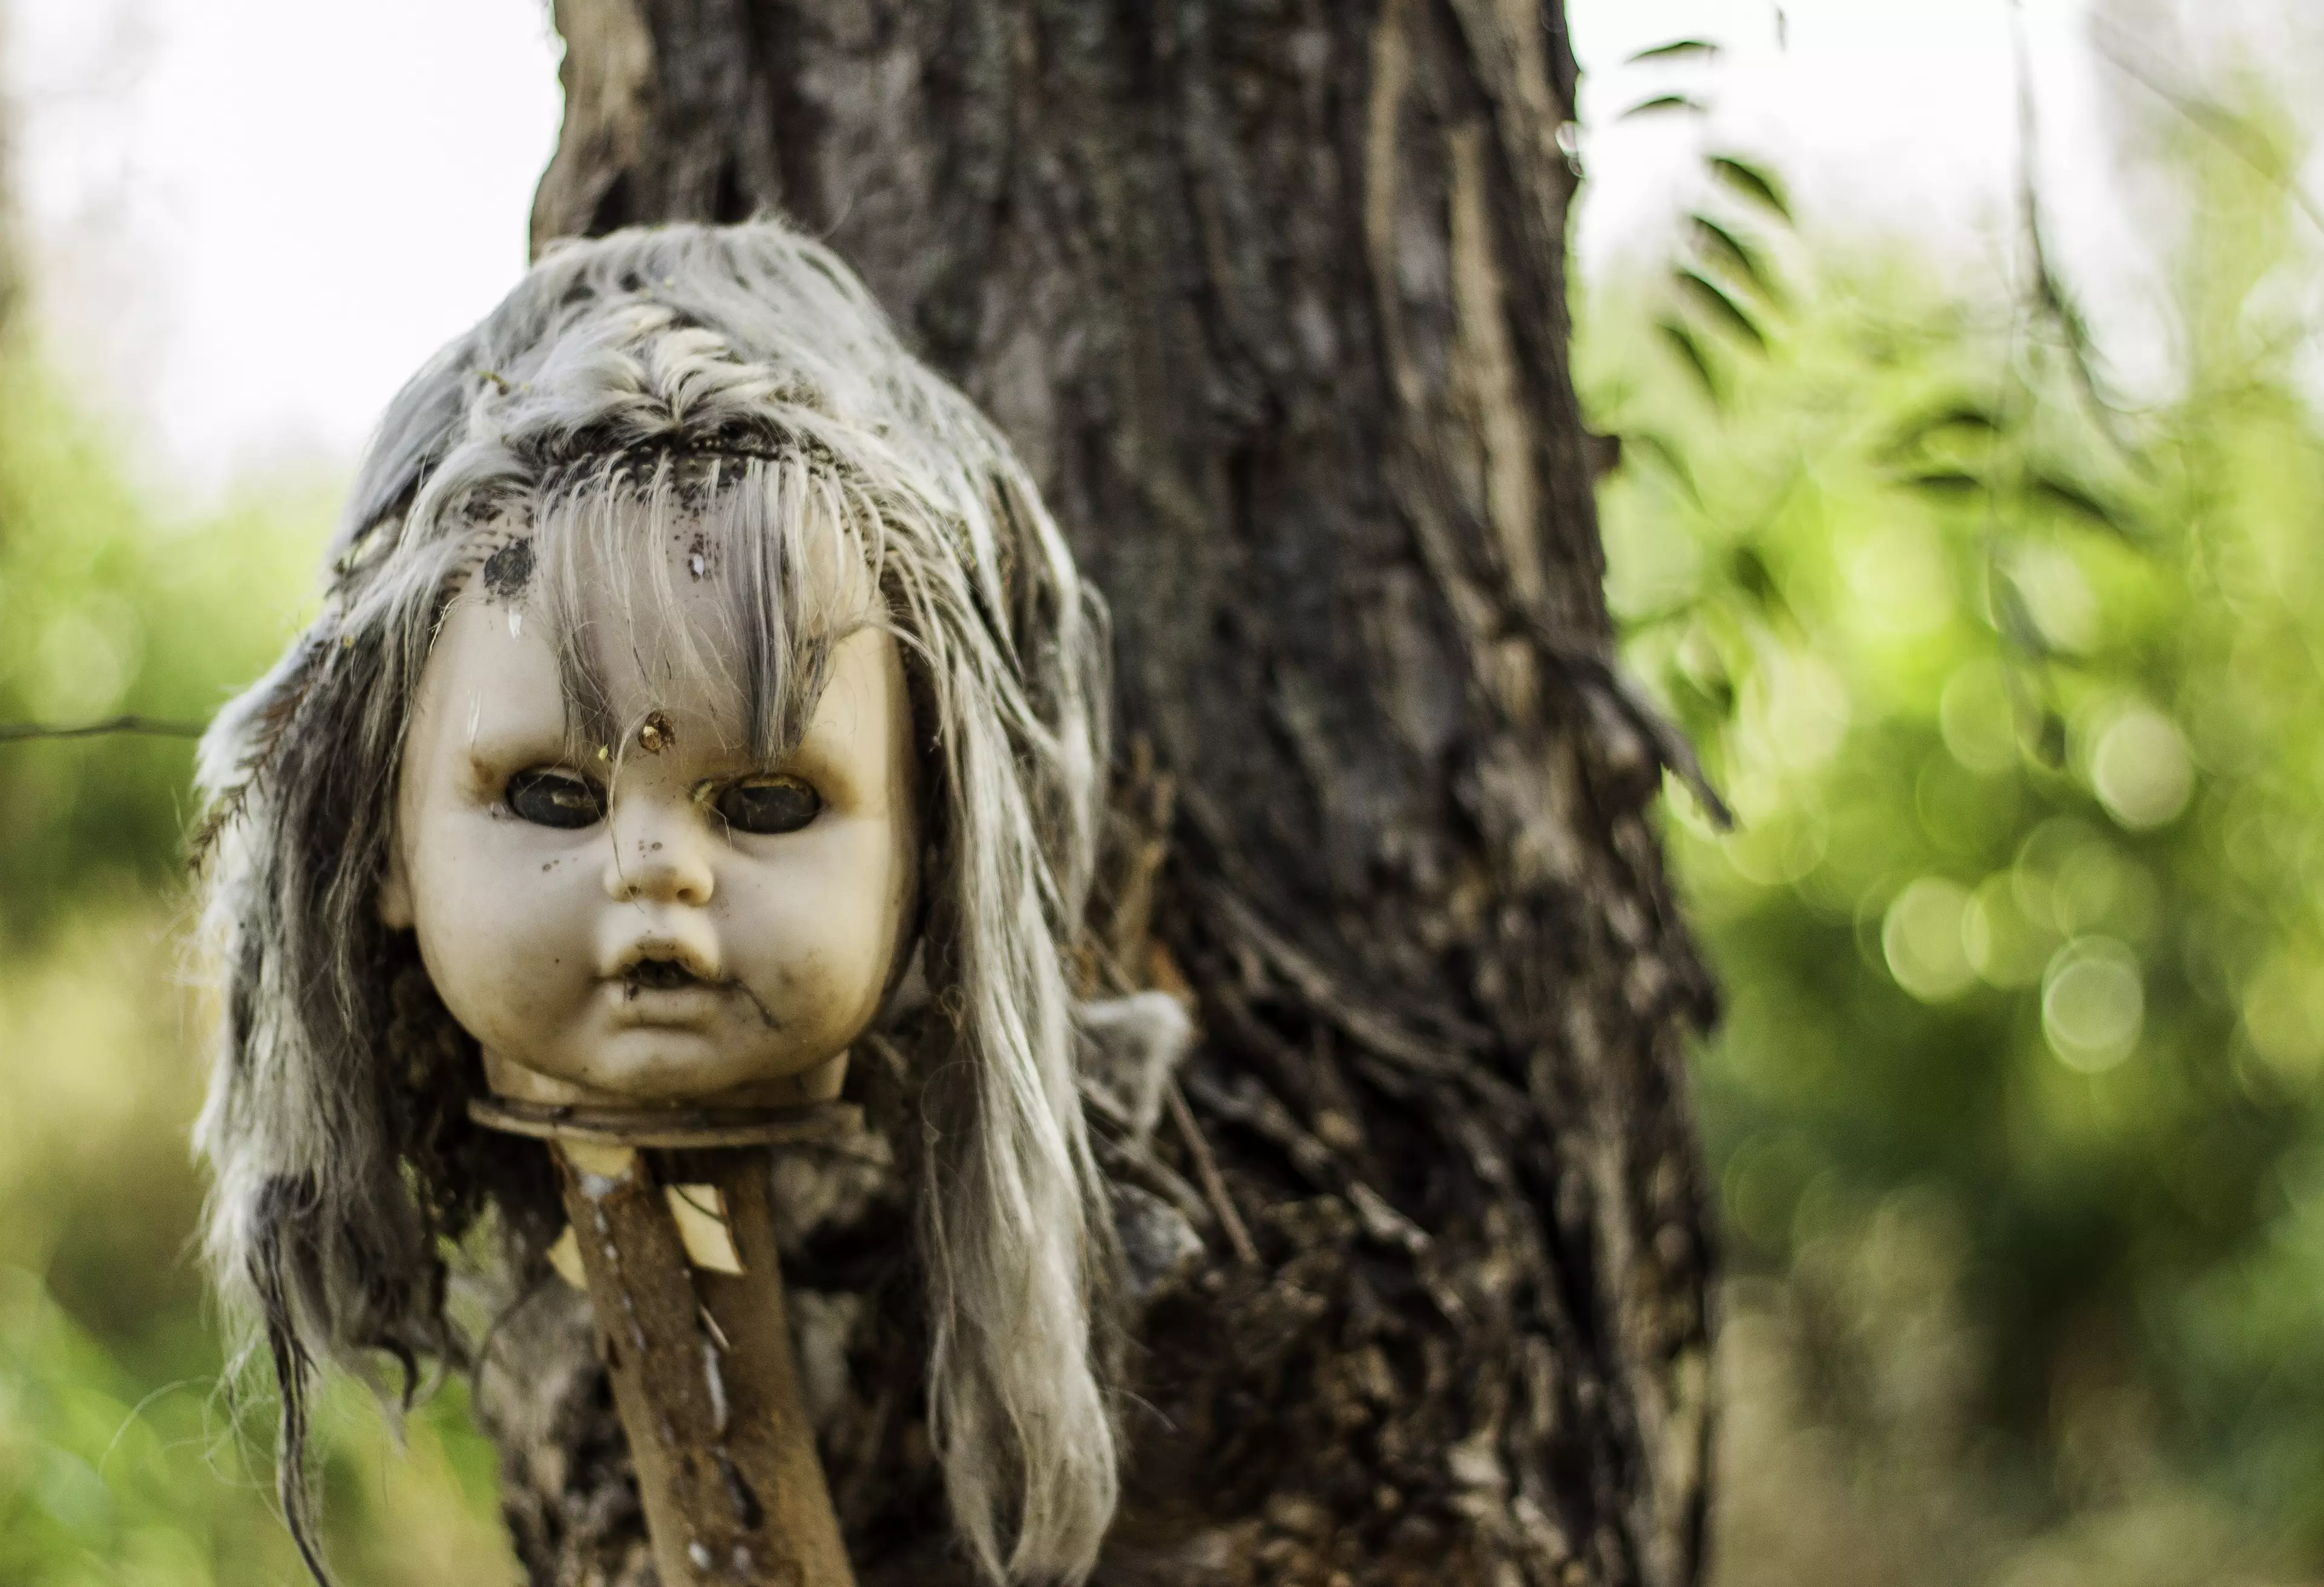 World's Creepiest Tourist Attraction Has Thousands Of Decapitated Baby Dolls